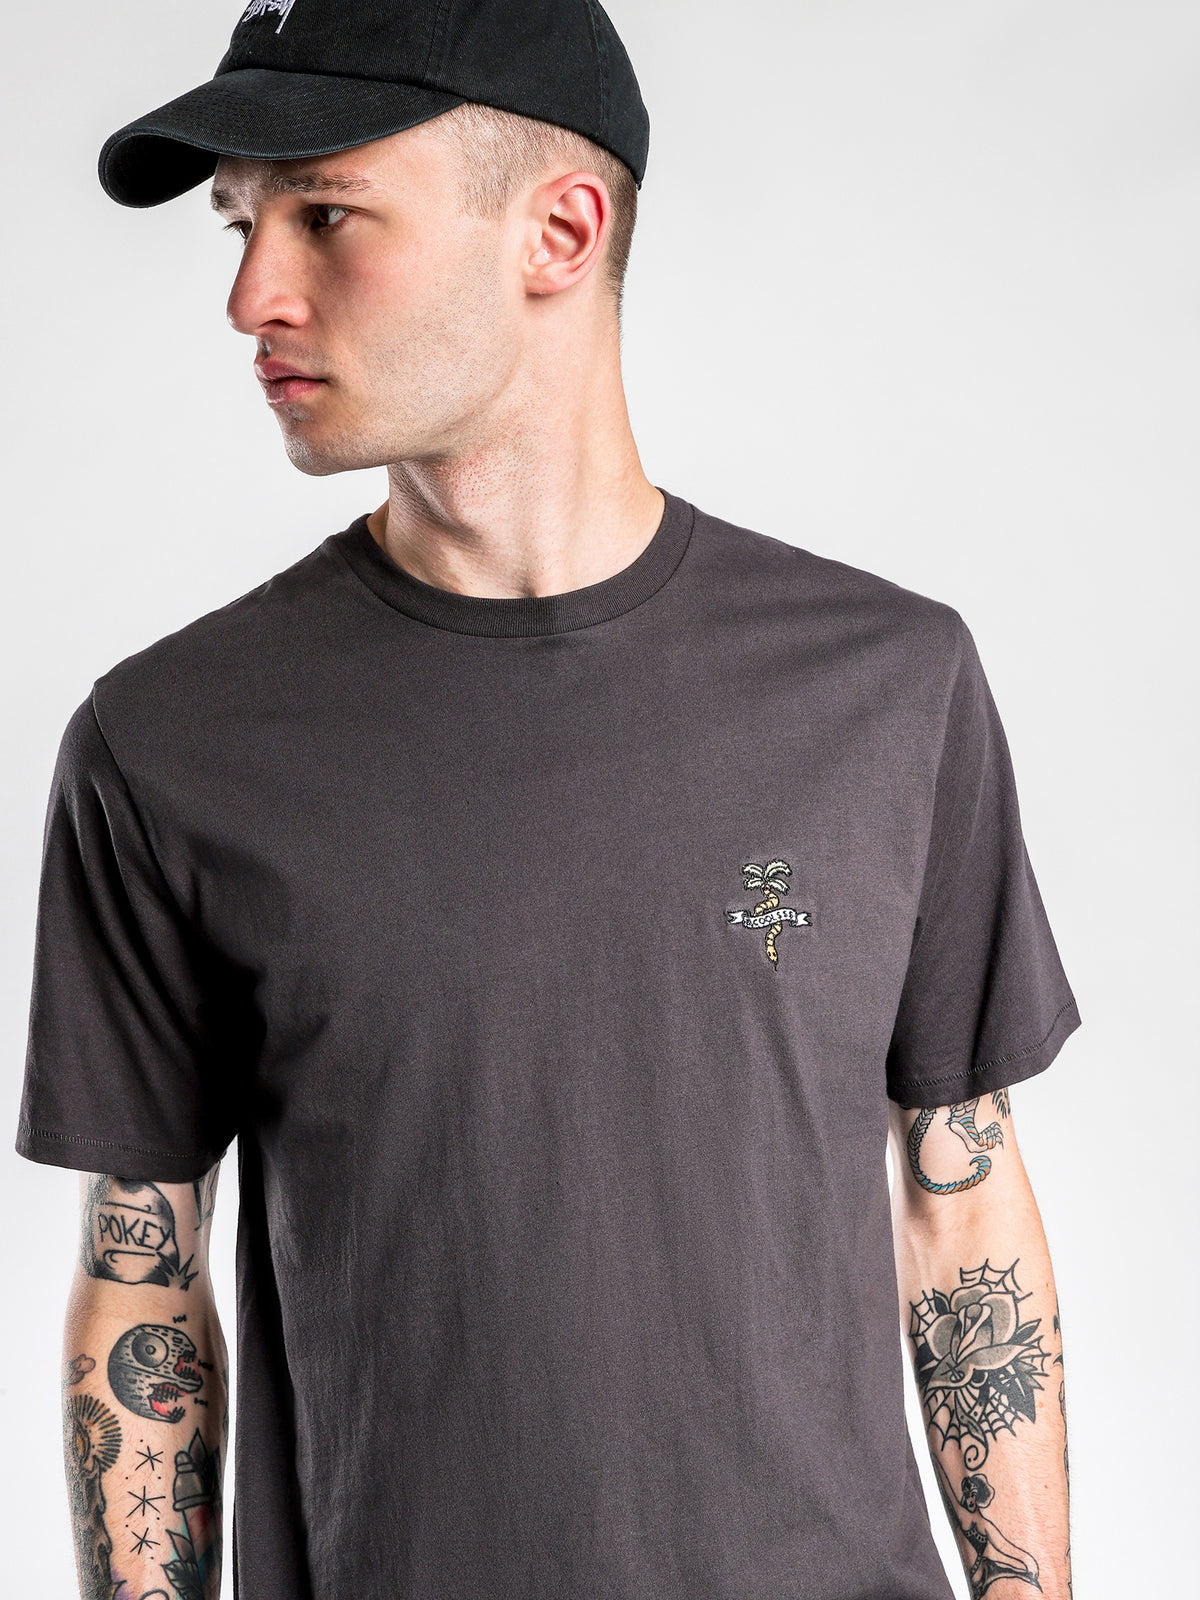 Snake Embro T-Shirt in Pigment Black